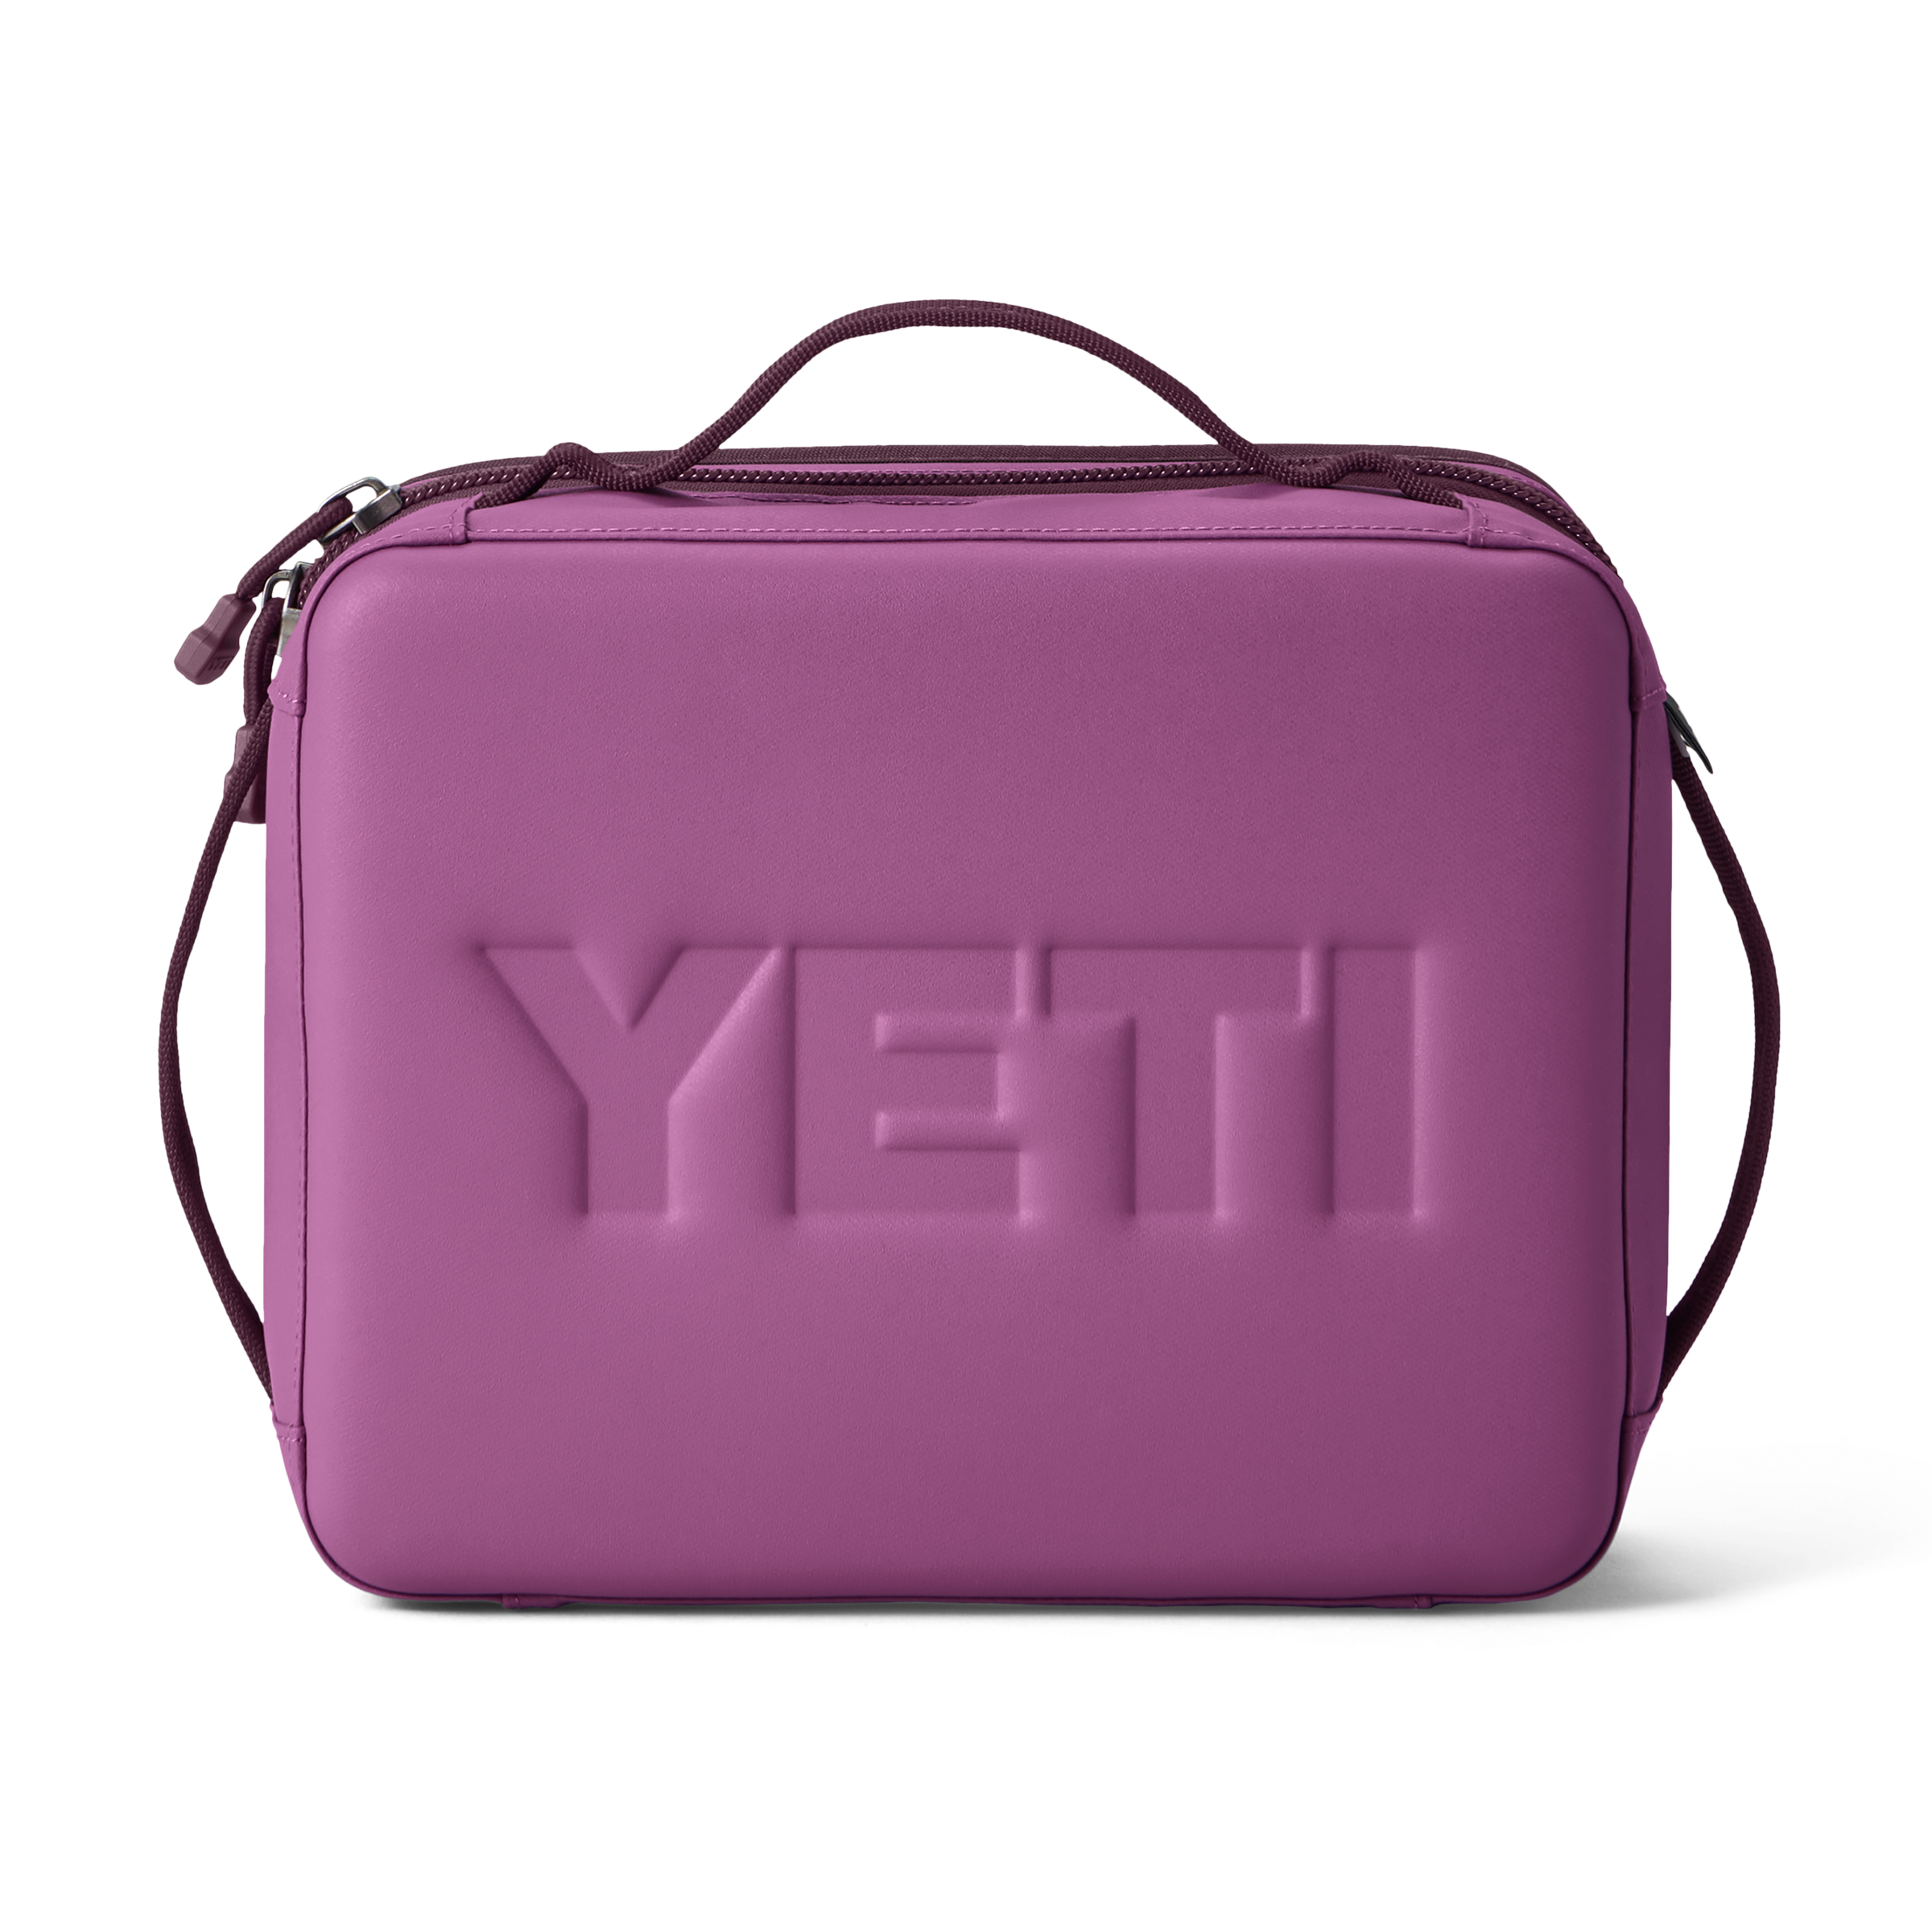 Take Day Trip With The New Yeti Lunch Bag 